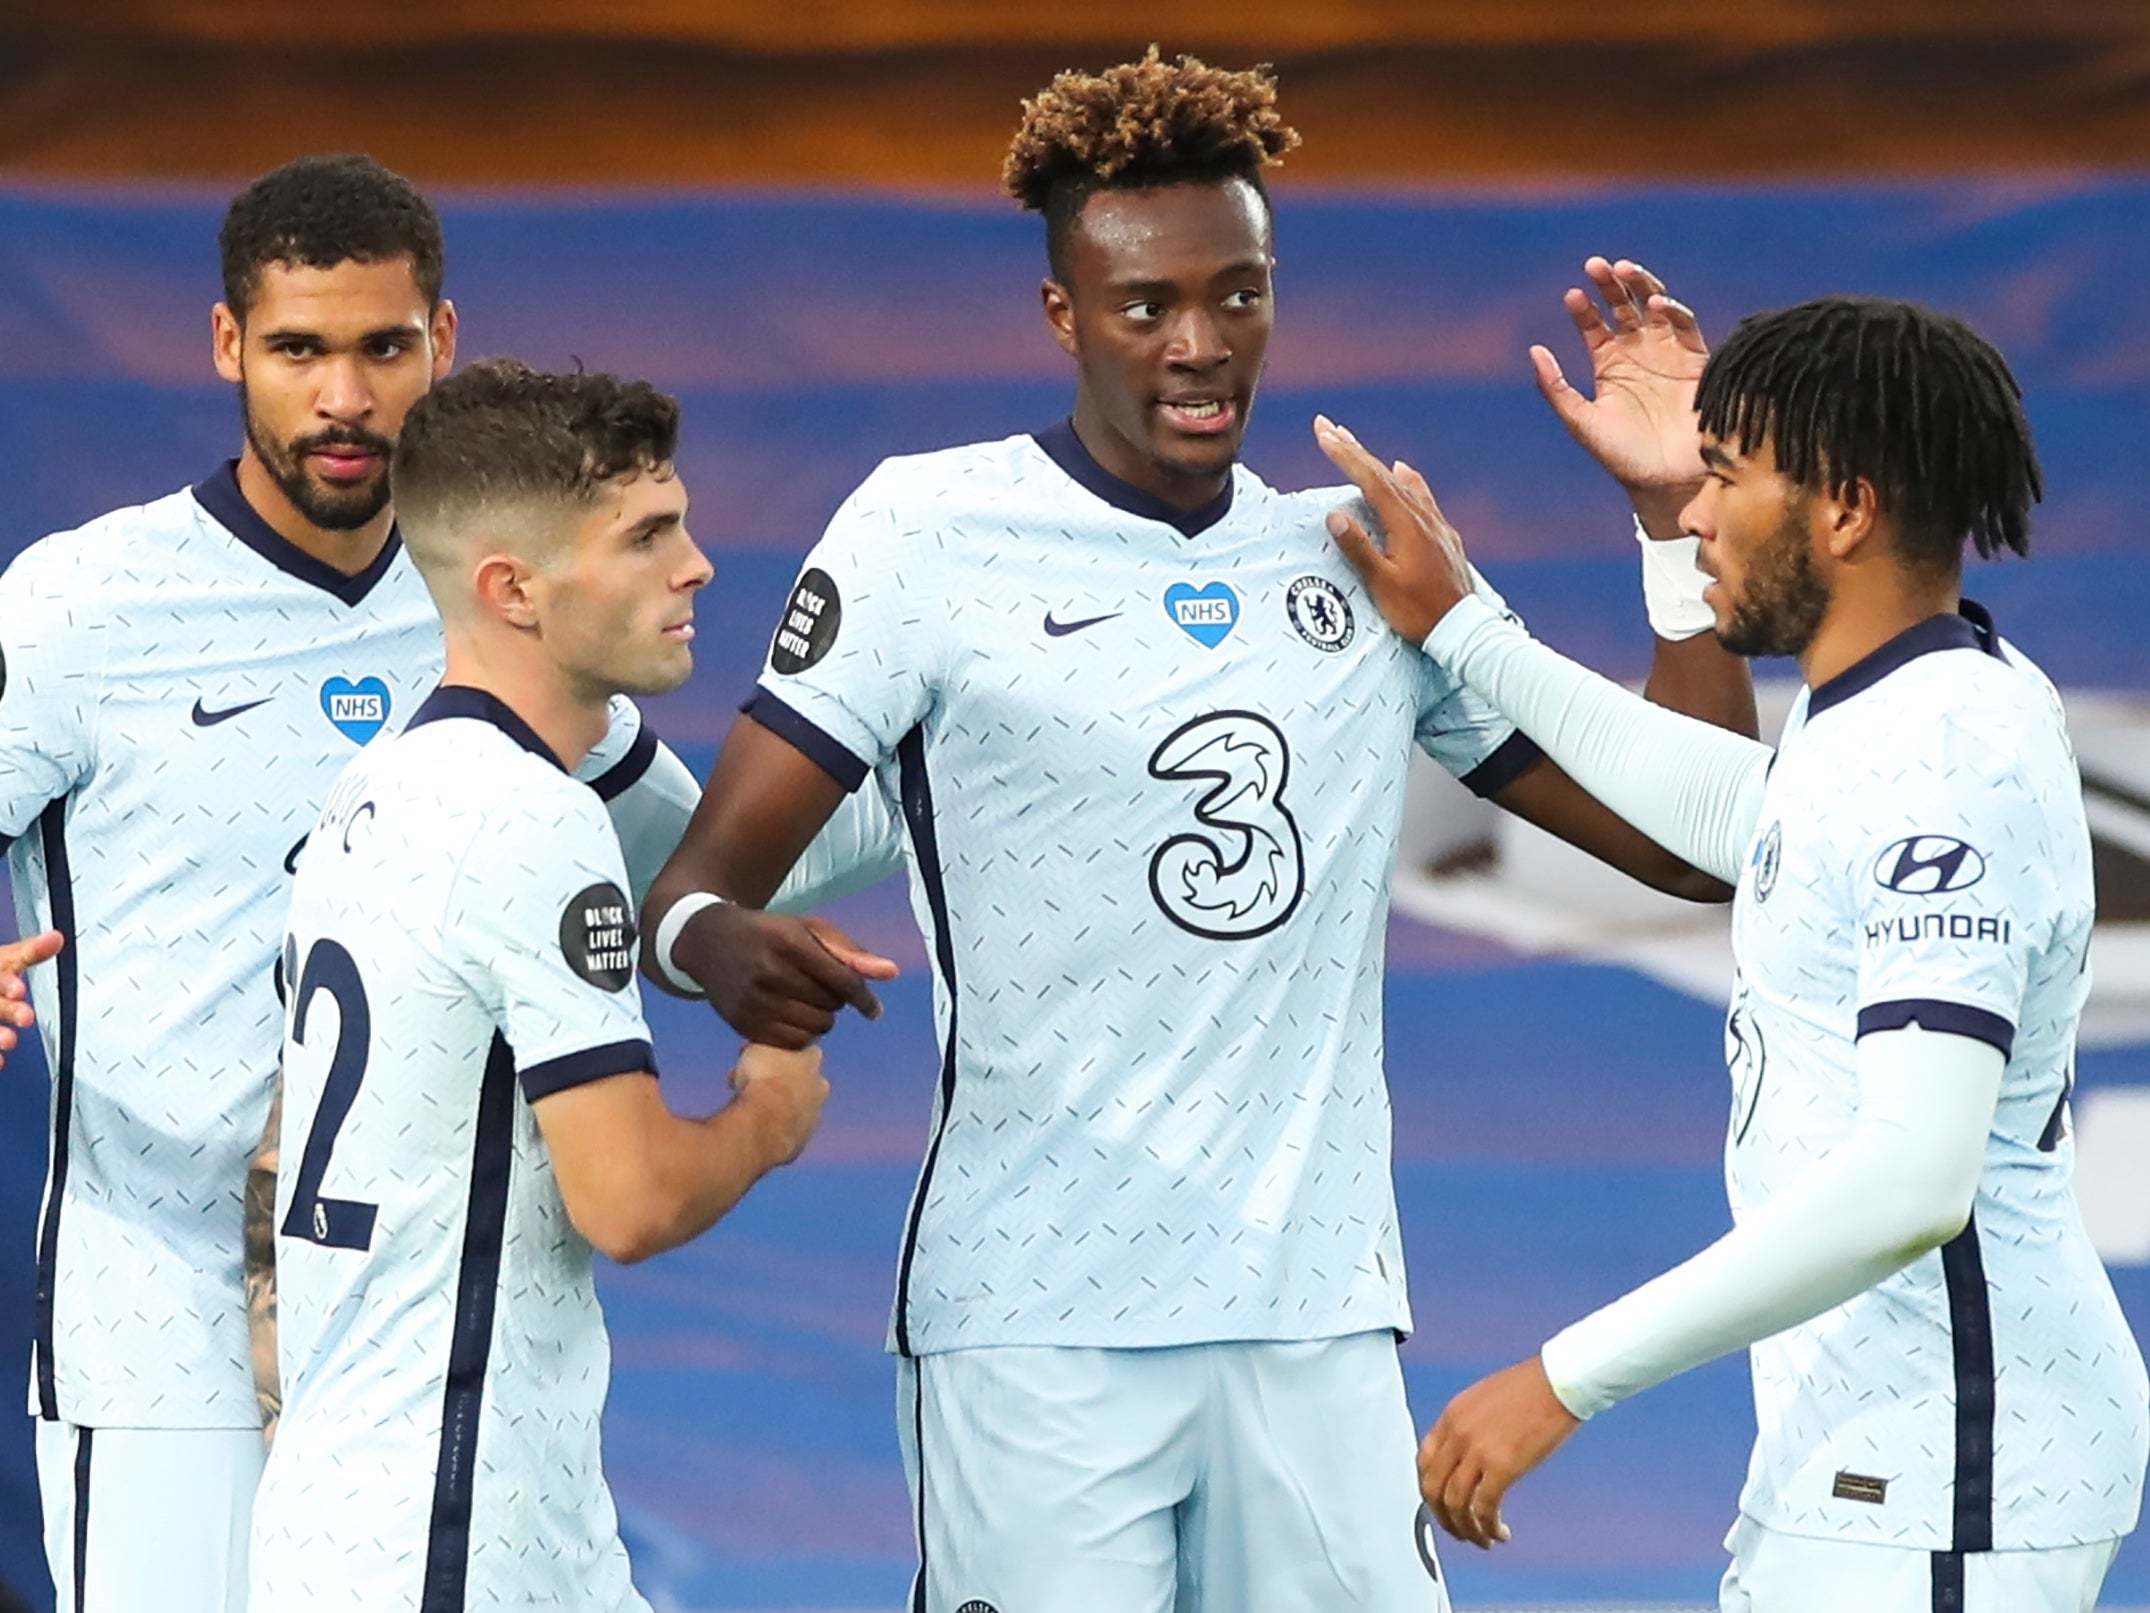 Tammy Abraham ended his goal drought with Chelsea's third